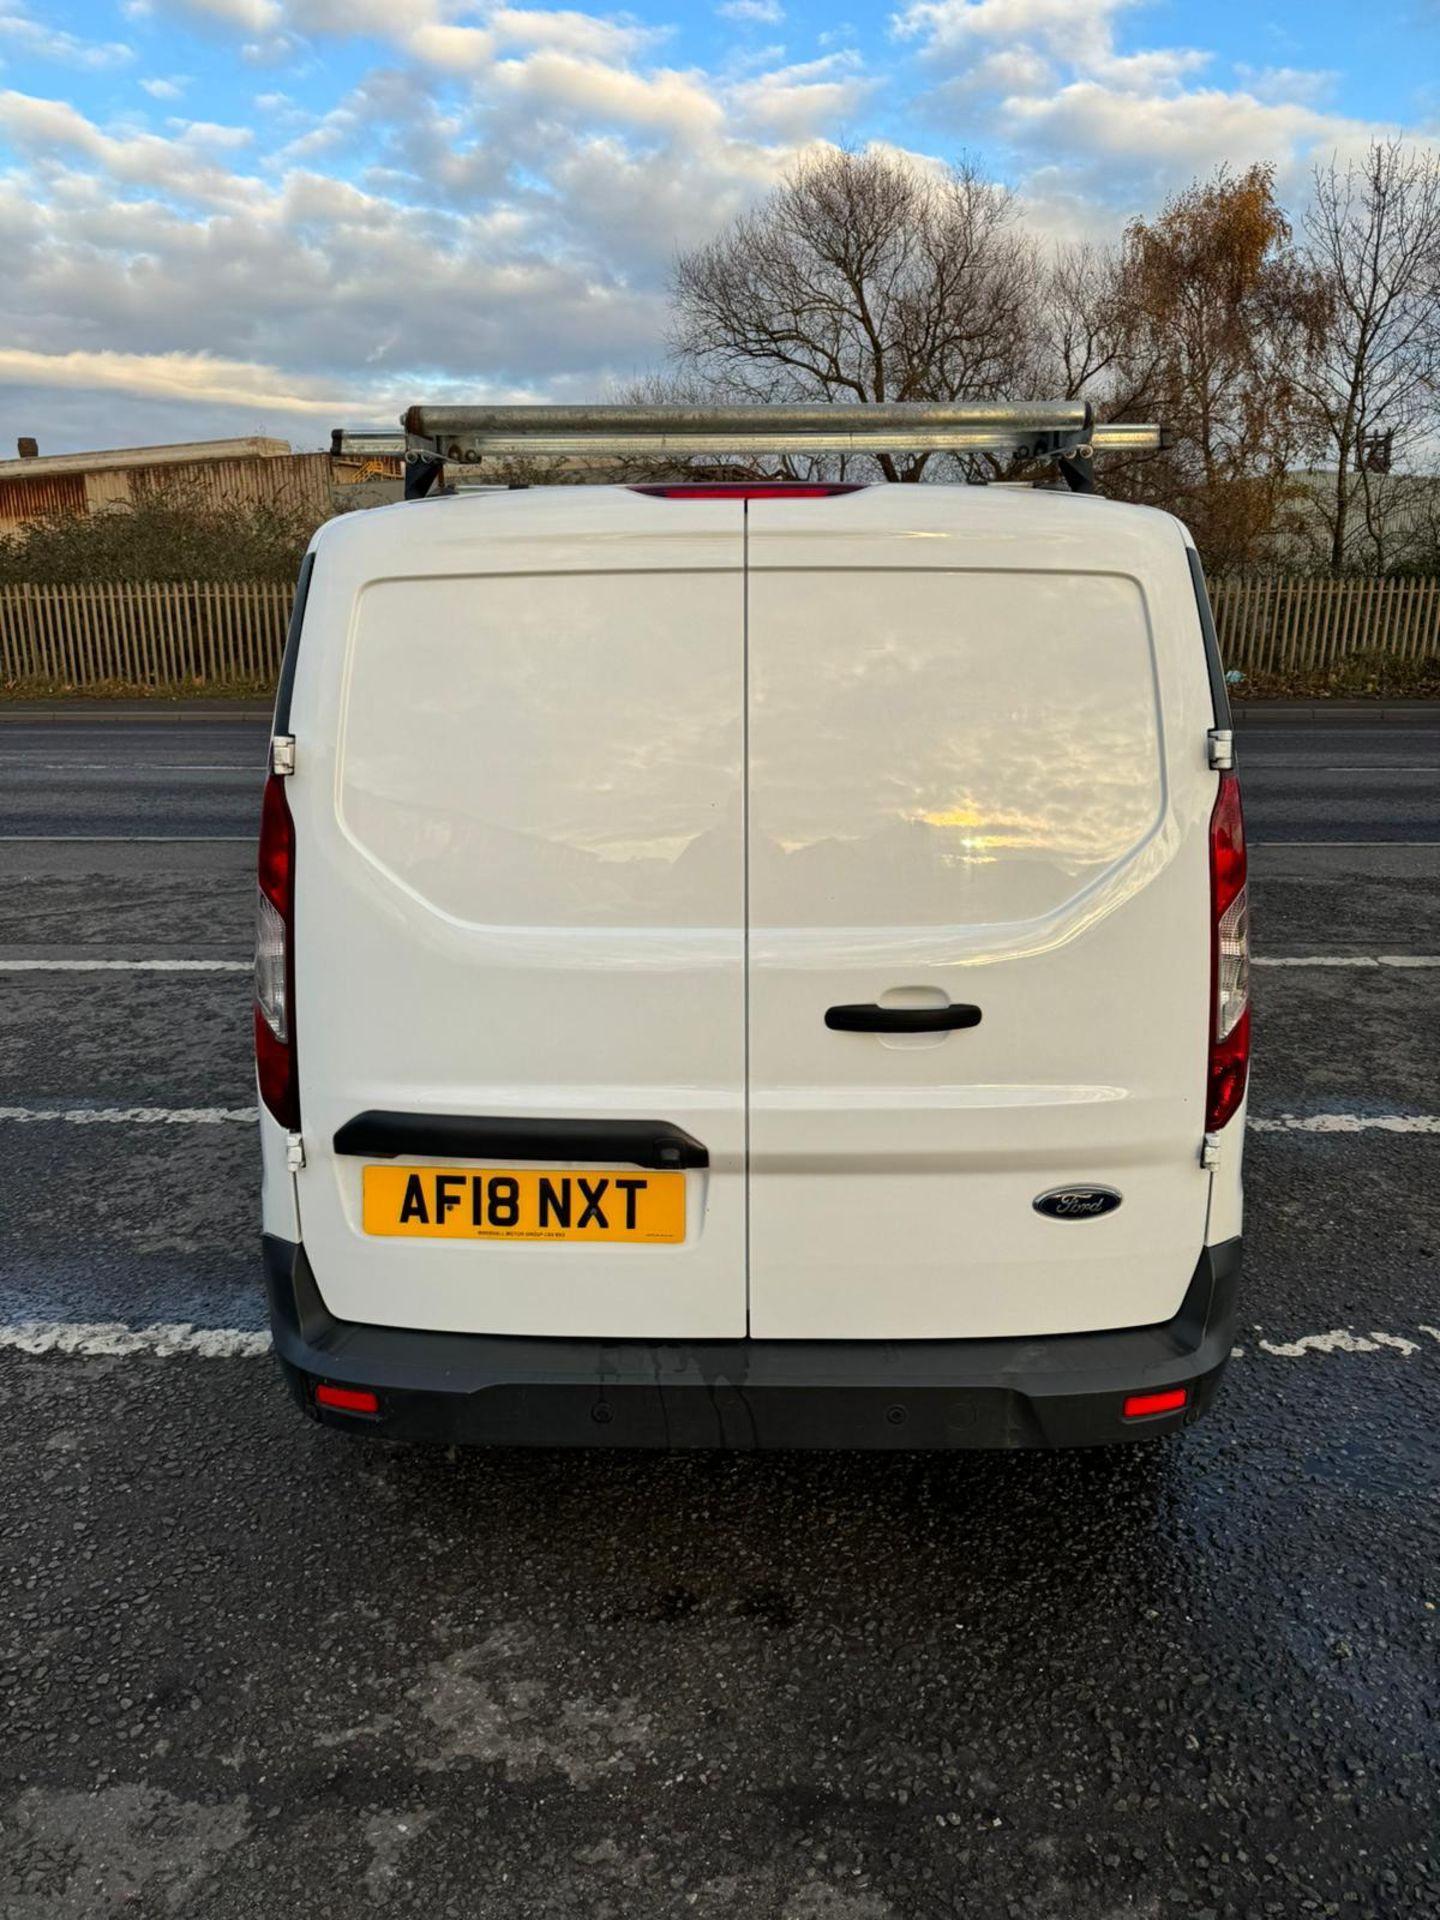 2018 18 FORD TRANSIT CONNECT TREND PAENL VAN - 128K MILES - EURO 6 - 3 SEATS - LWB - ROOF RACK - Image 3 of 11